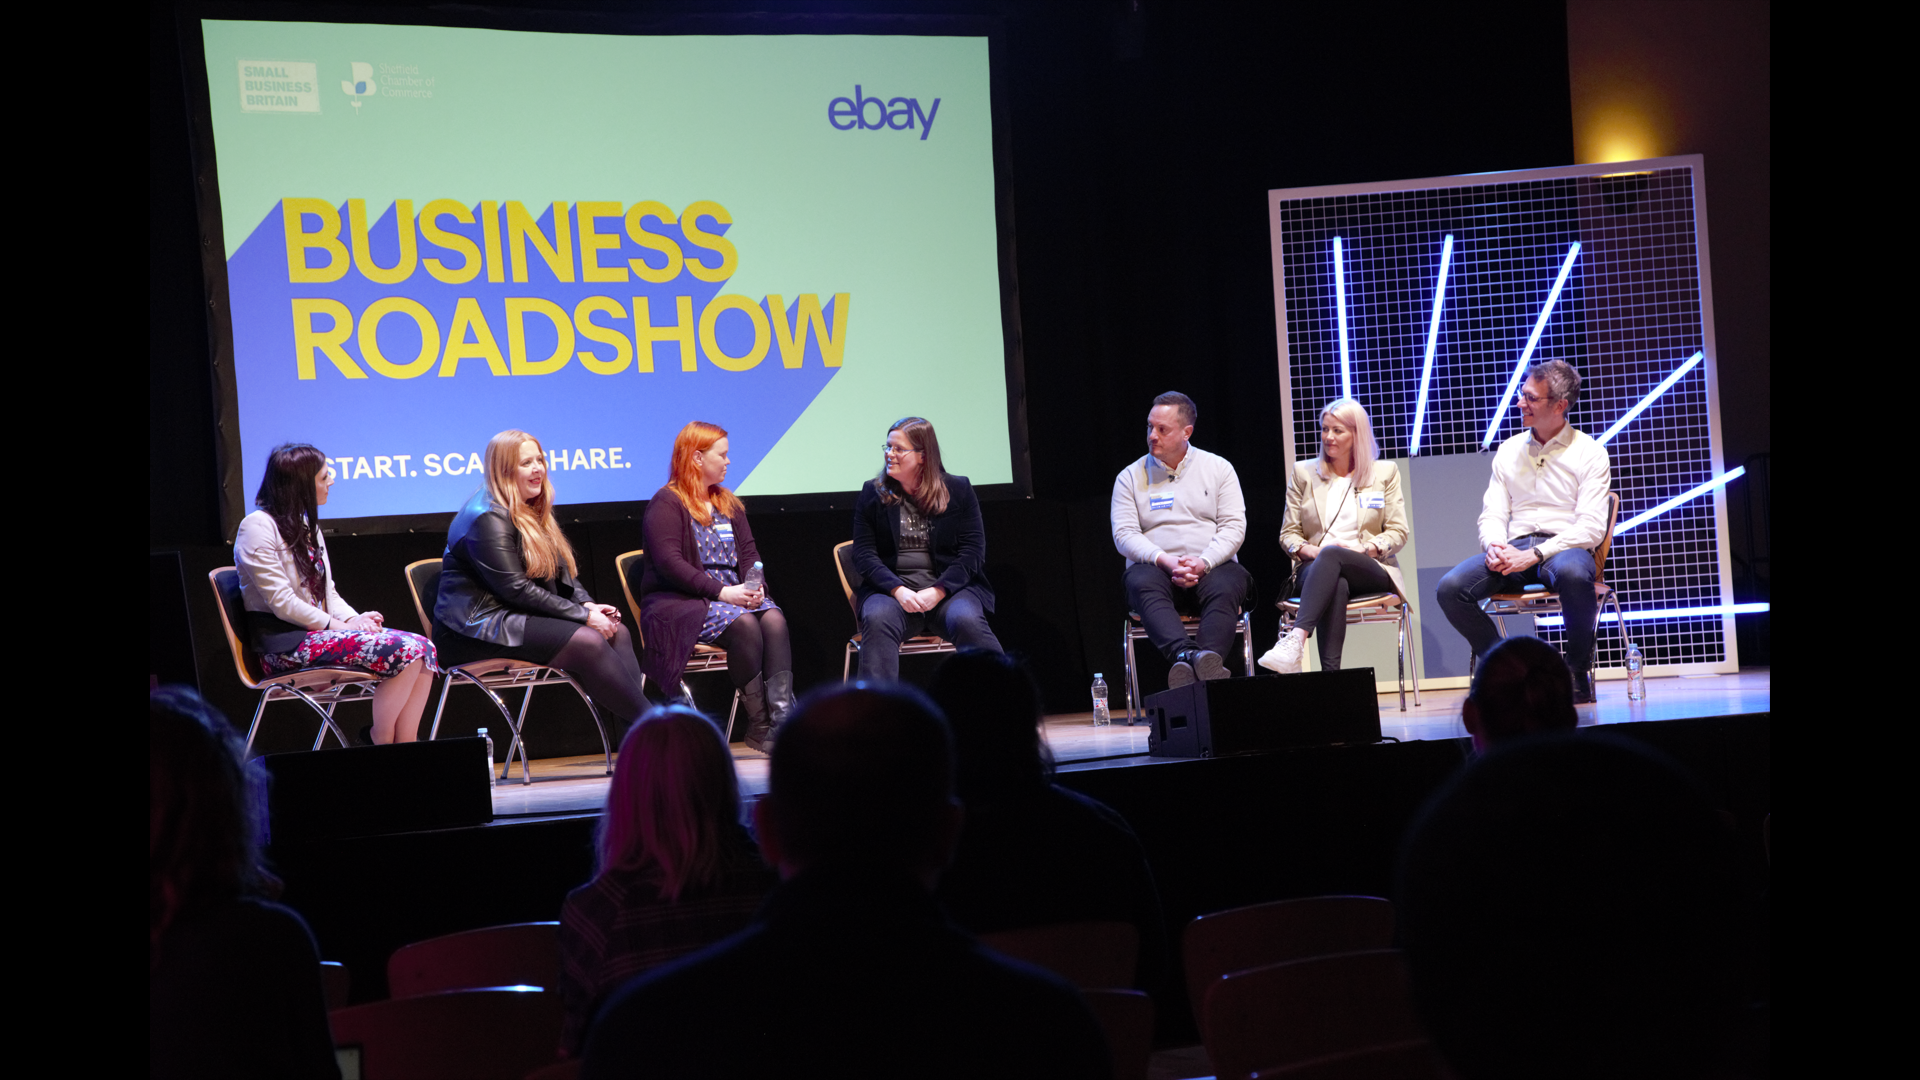 New eBay business roadshow helping sellers go from side-hustle to online sensation… and it's coming to a town near you with a chance for bus...